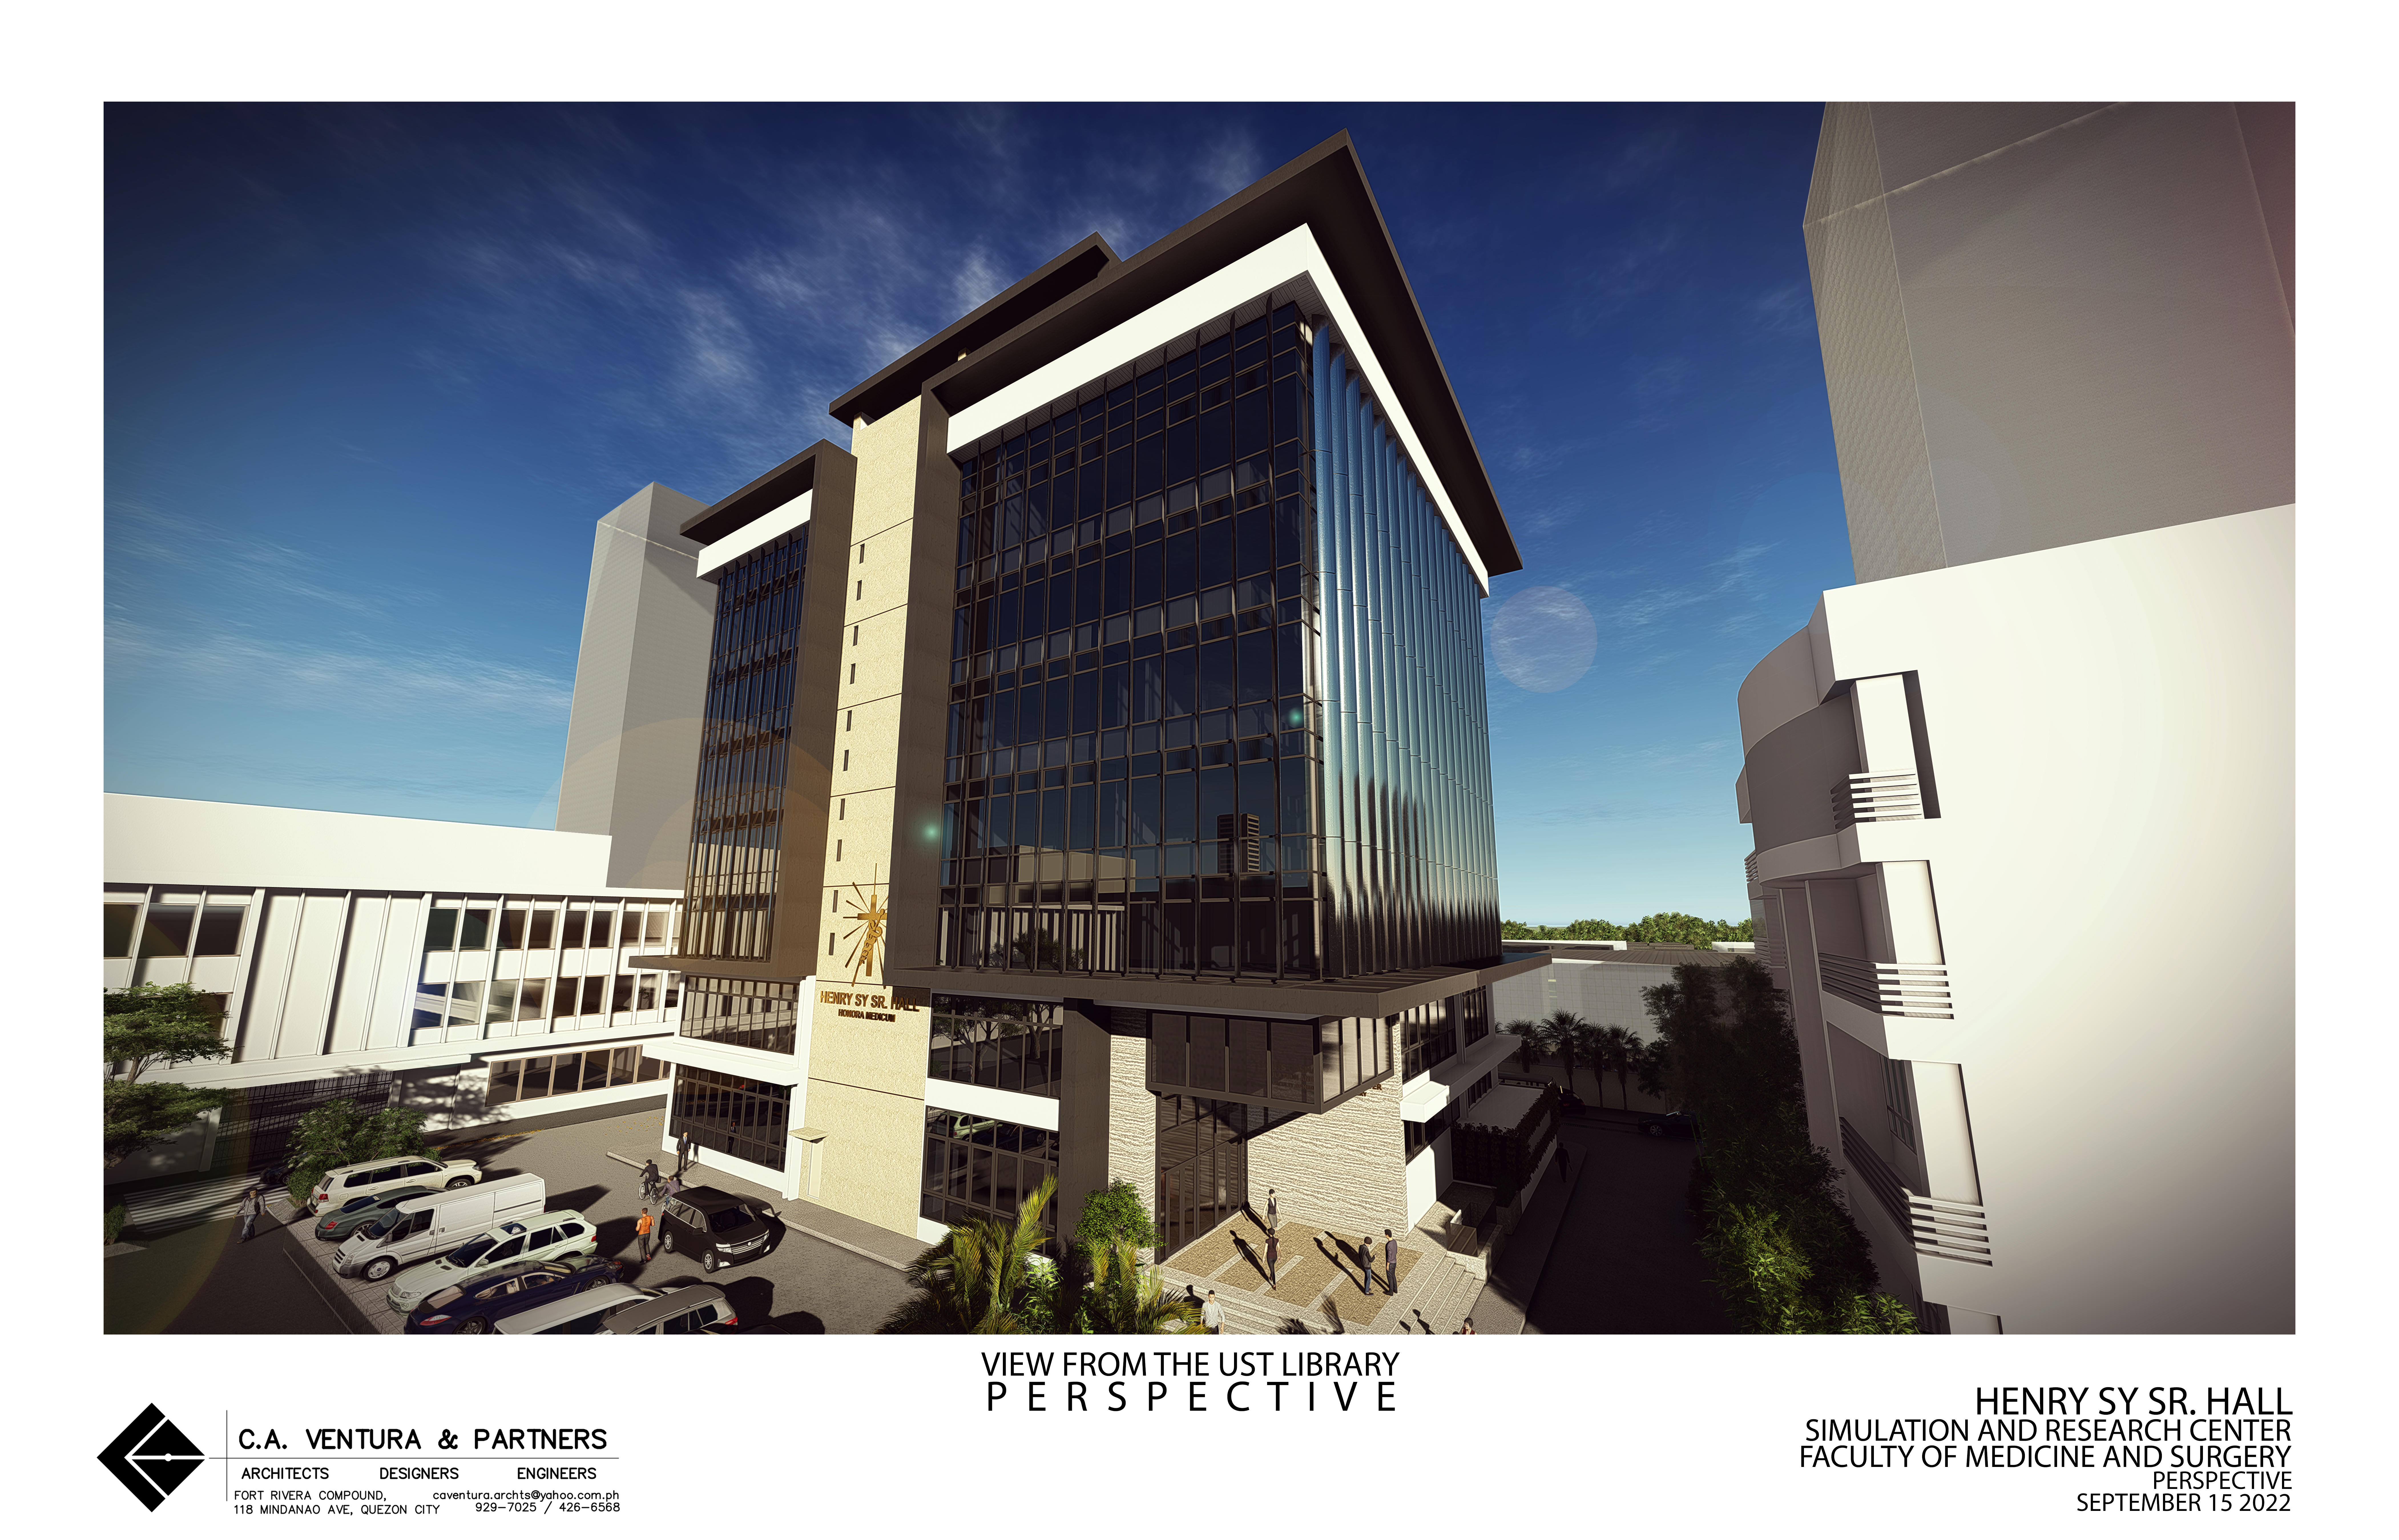 Designed by C.A. Ventura & Partners, the upcoming Henry Sy., Sr. Hall in UST is envisioned to propel the health education of future physicians in the country.